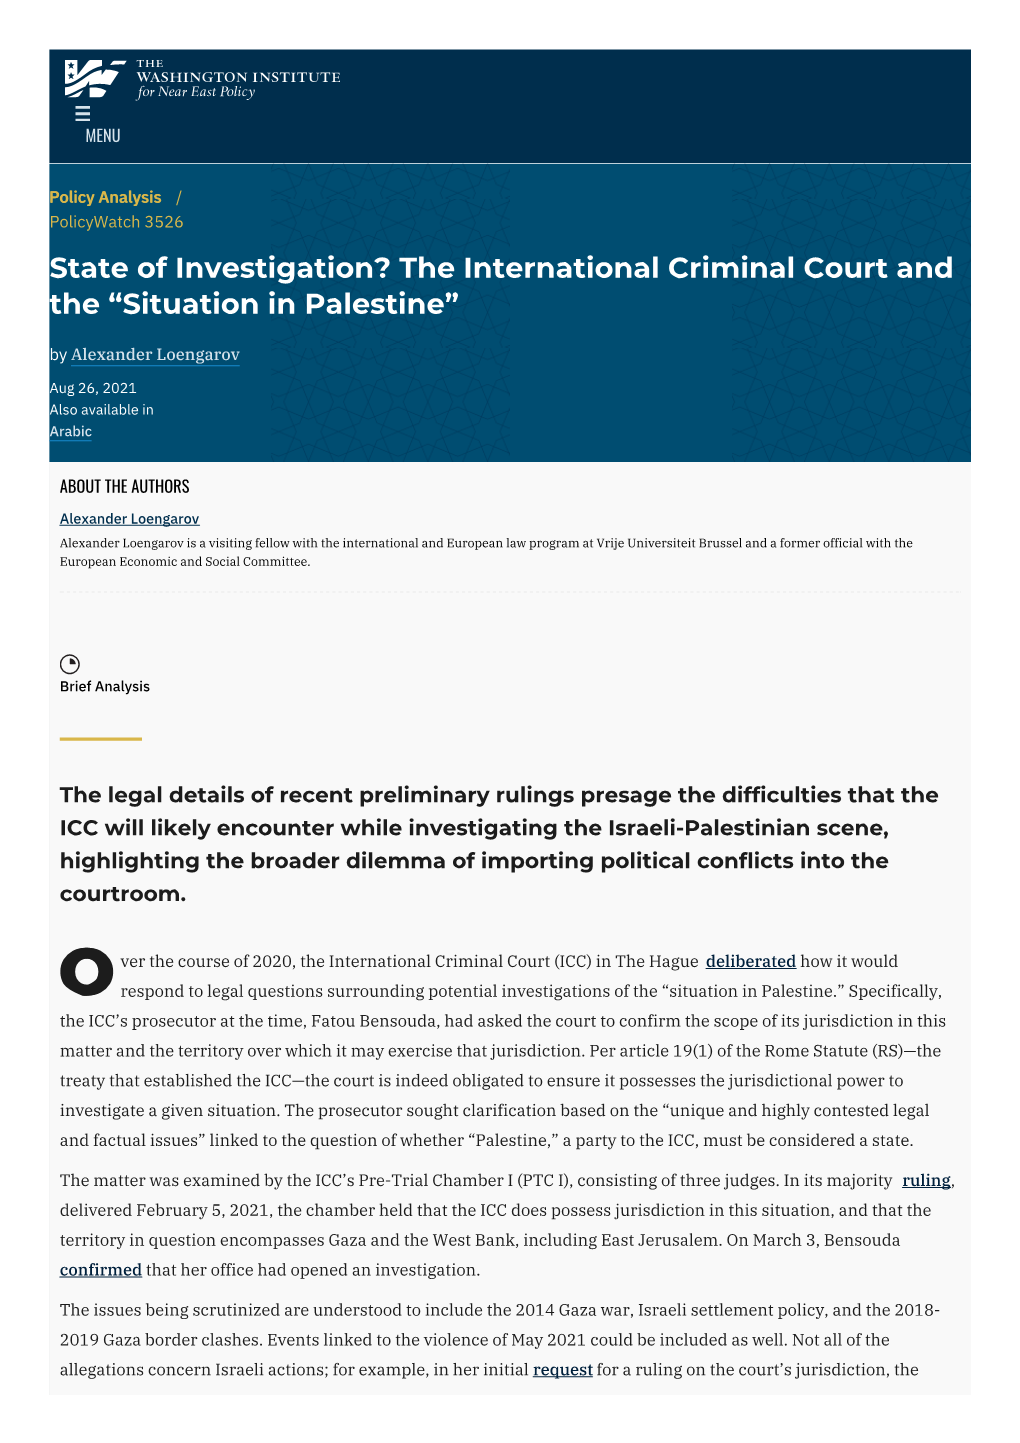 State of Investigation? the International Criminal Court and the “Situation in Palestine” by Alexander Loengarov